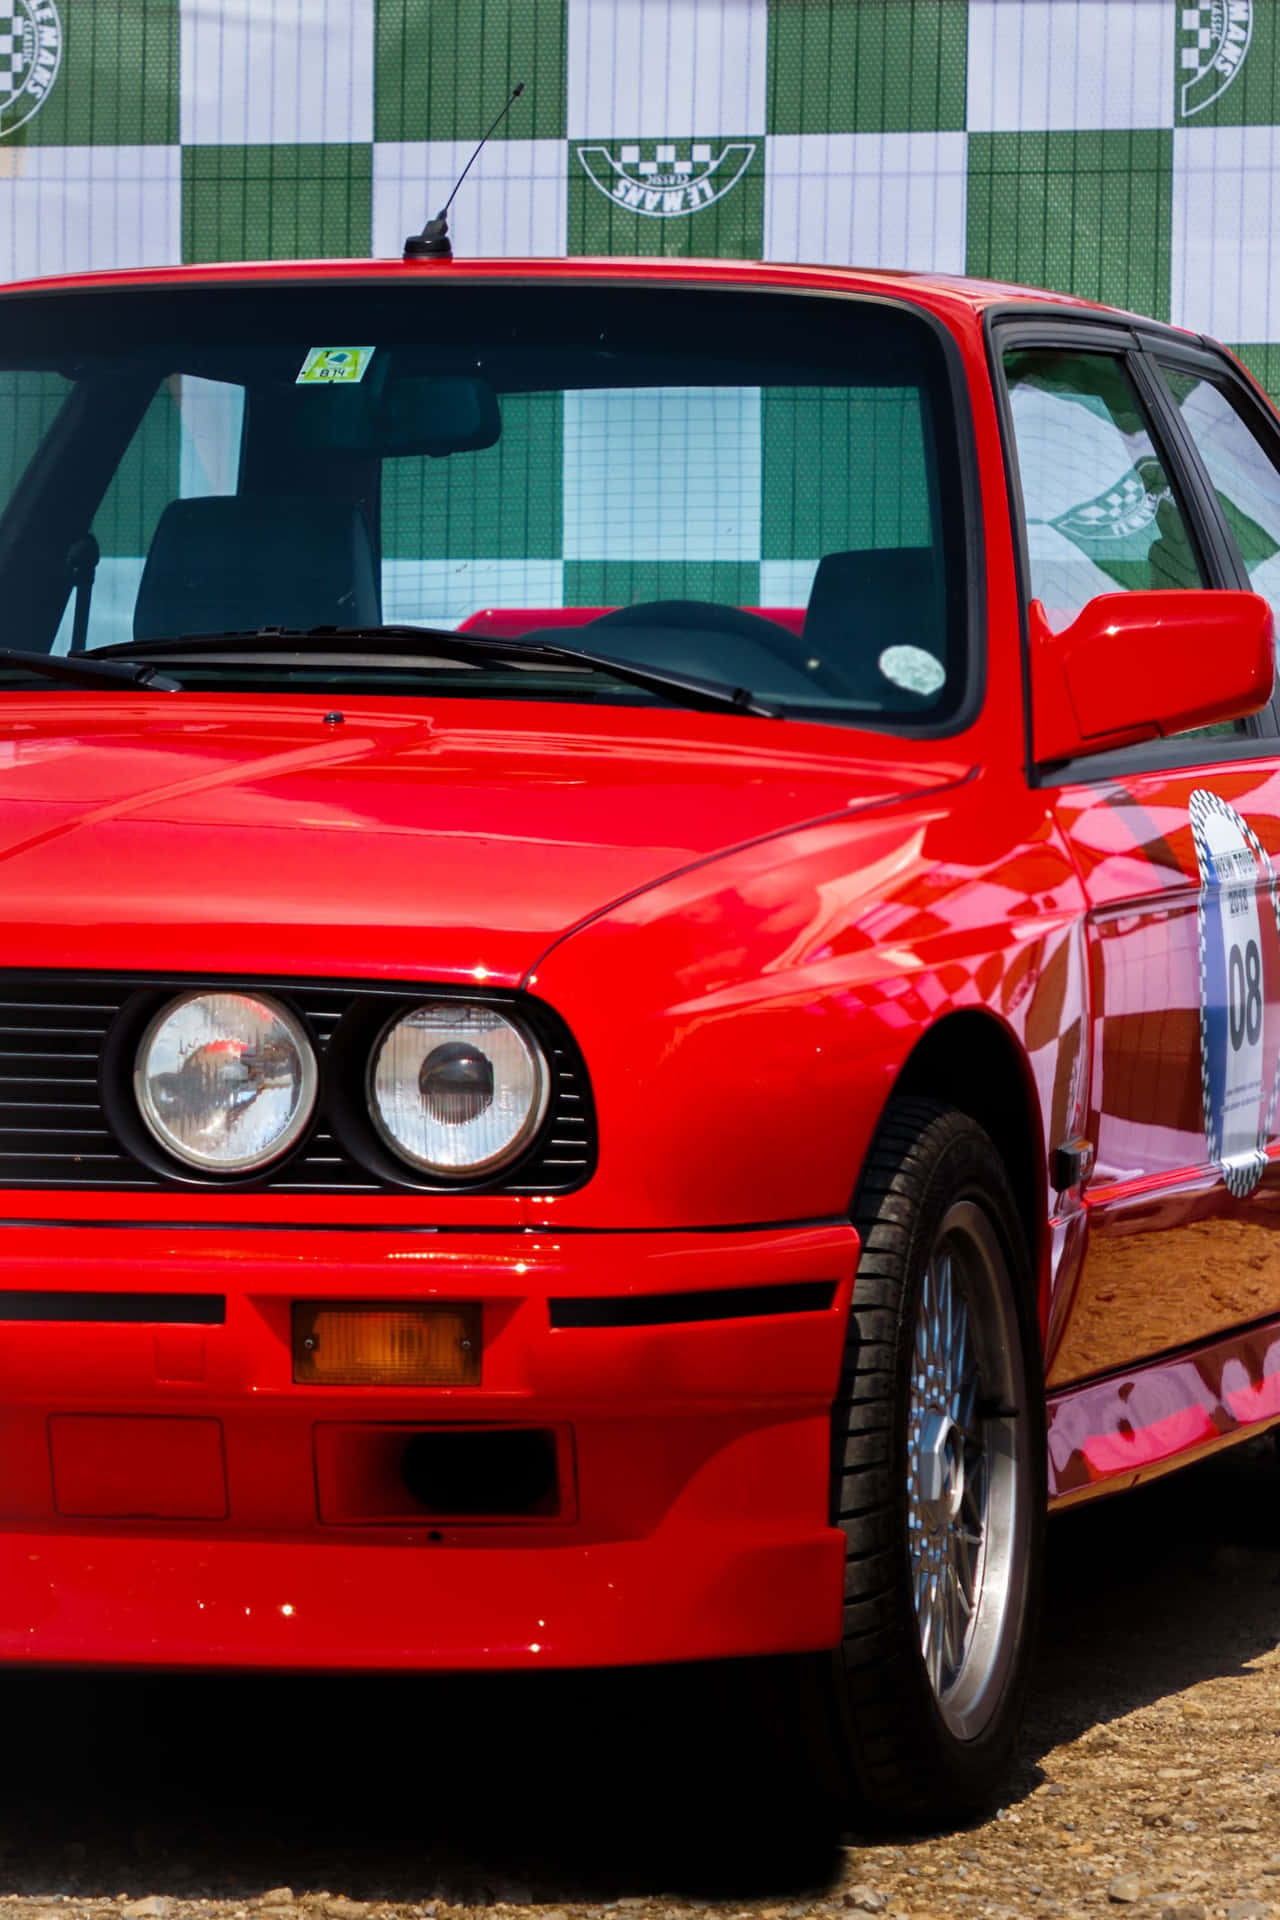 The Bmw E30 M3 Is A Car That Exudes Style And Performance